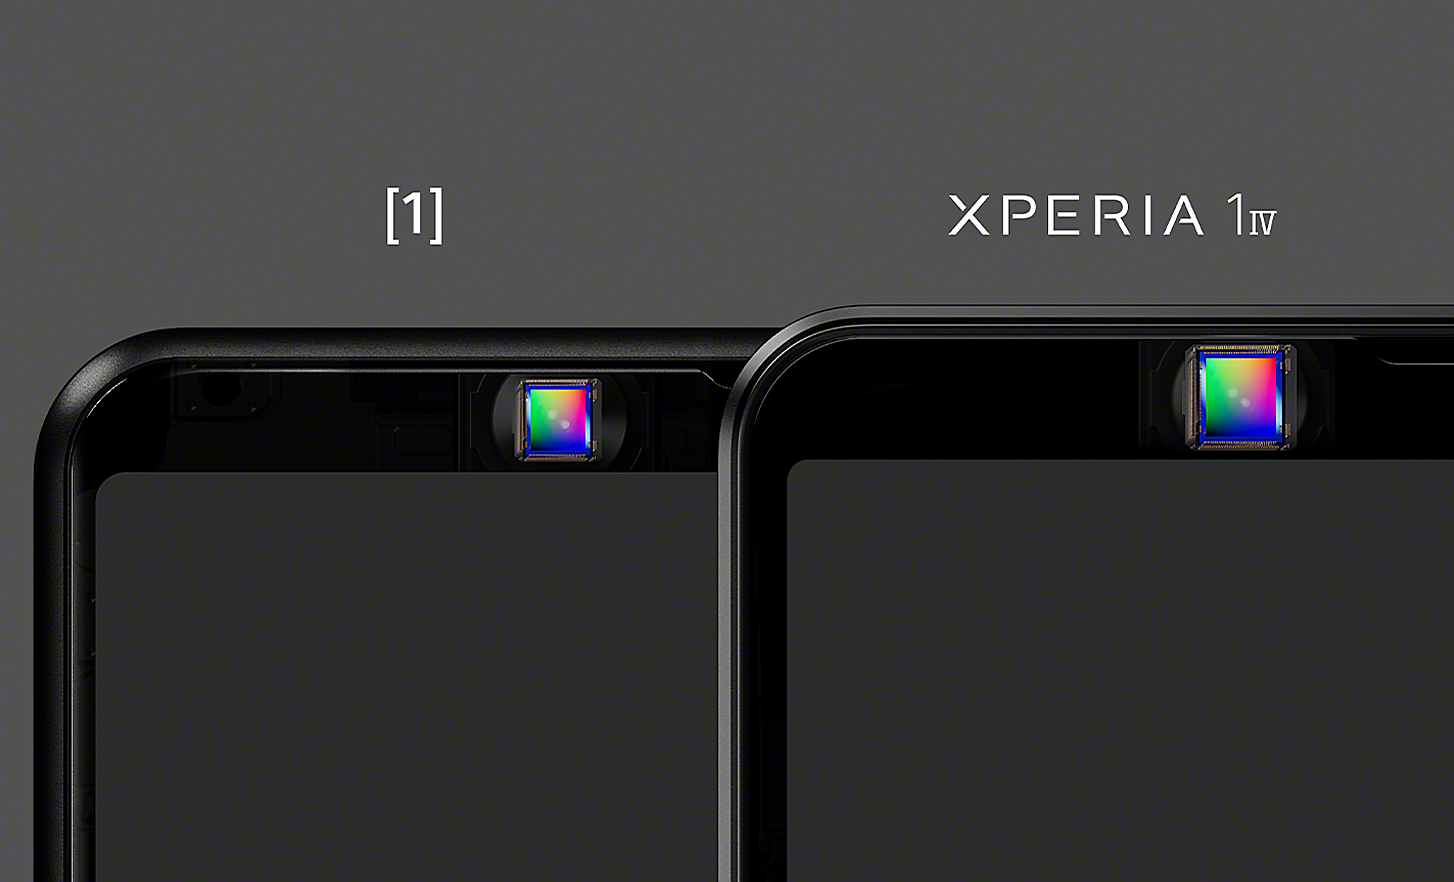 Image comparing the front camera image sensor on the Xperia 1 IV with the smaller sensor on the previous model